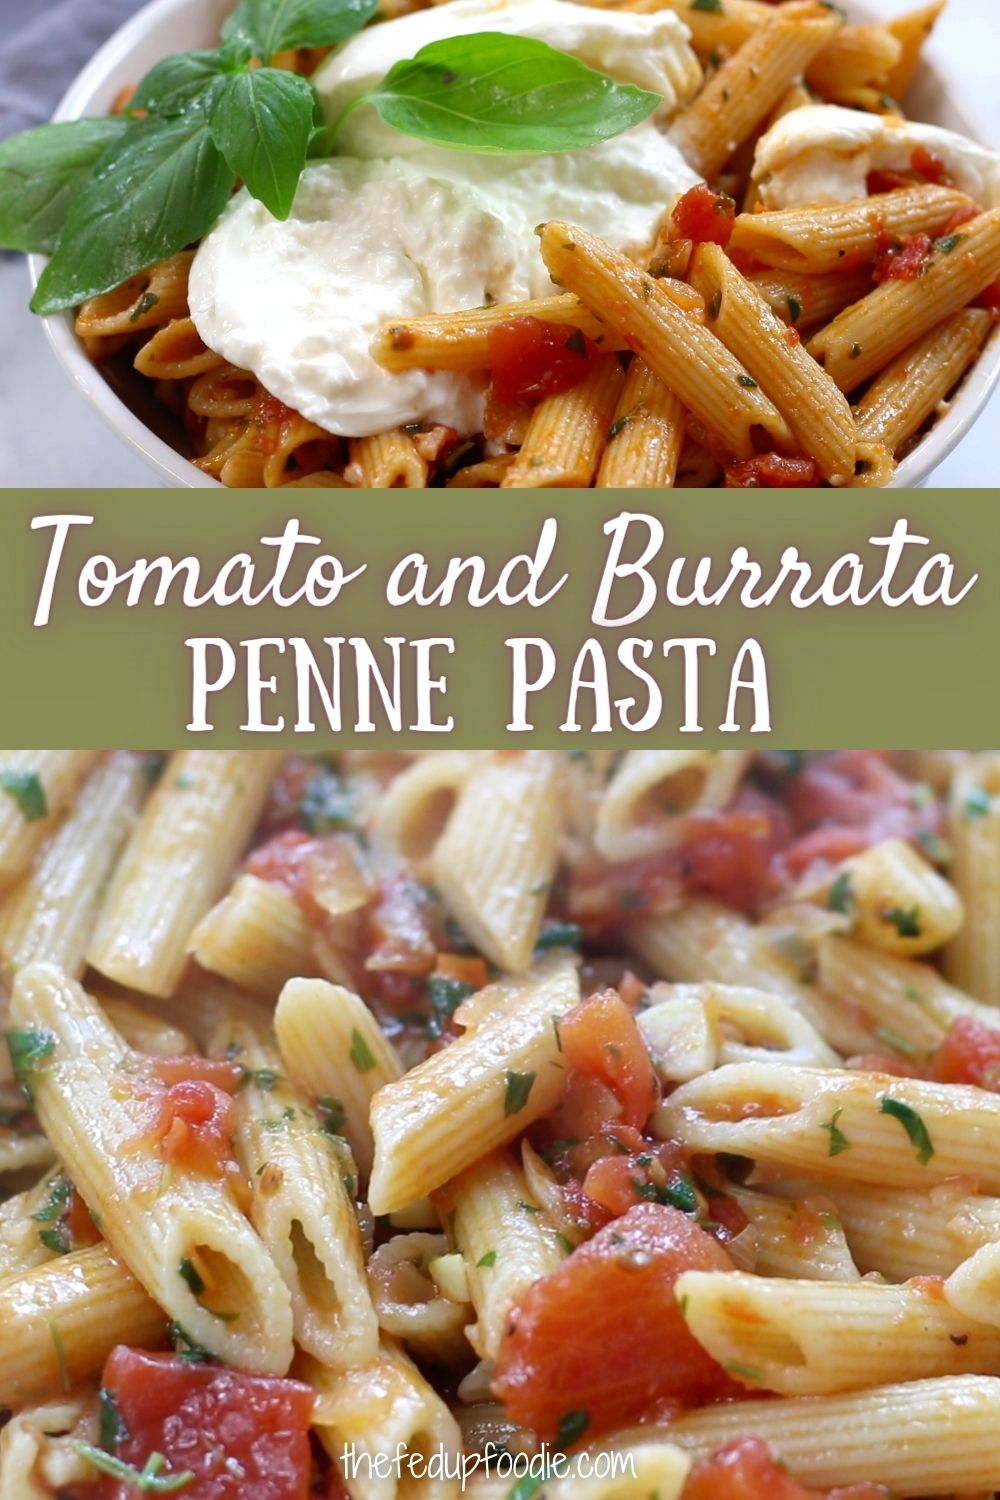 Tomato and Burrata Penne Pasta is a quick and light homemade Italian meal that the whole family will adore. So easy and delicious with fresh herbs and al dente pasta. Top with creamy burrata and you will feel like your eating dinner at an Italian sidewalk cafe.
#TomatoPennePasta #TomatoPenne #PenneNoodleRecipesEasy #BurrataPasta #PastaWithBurrataCheese 